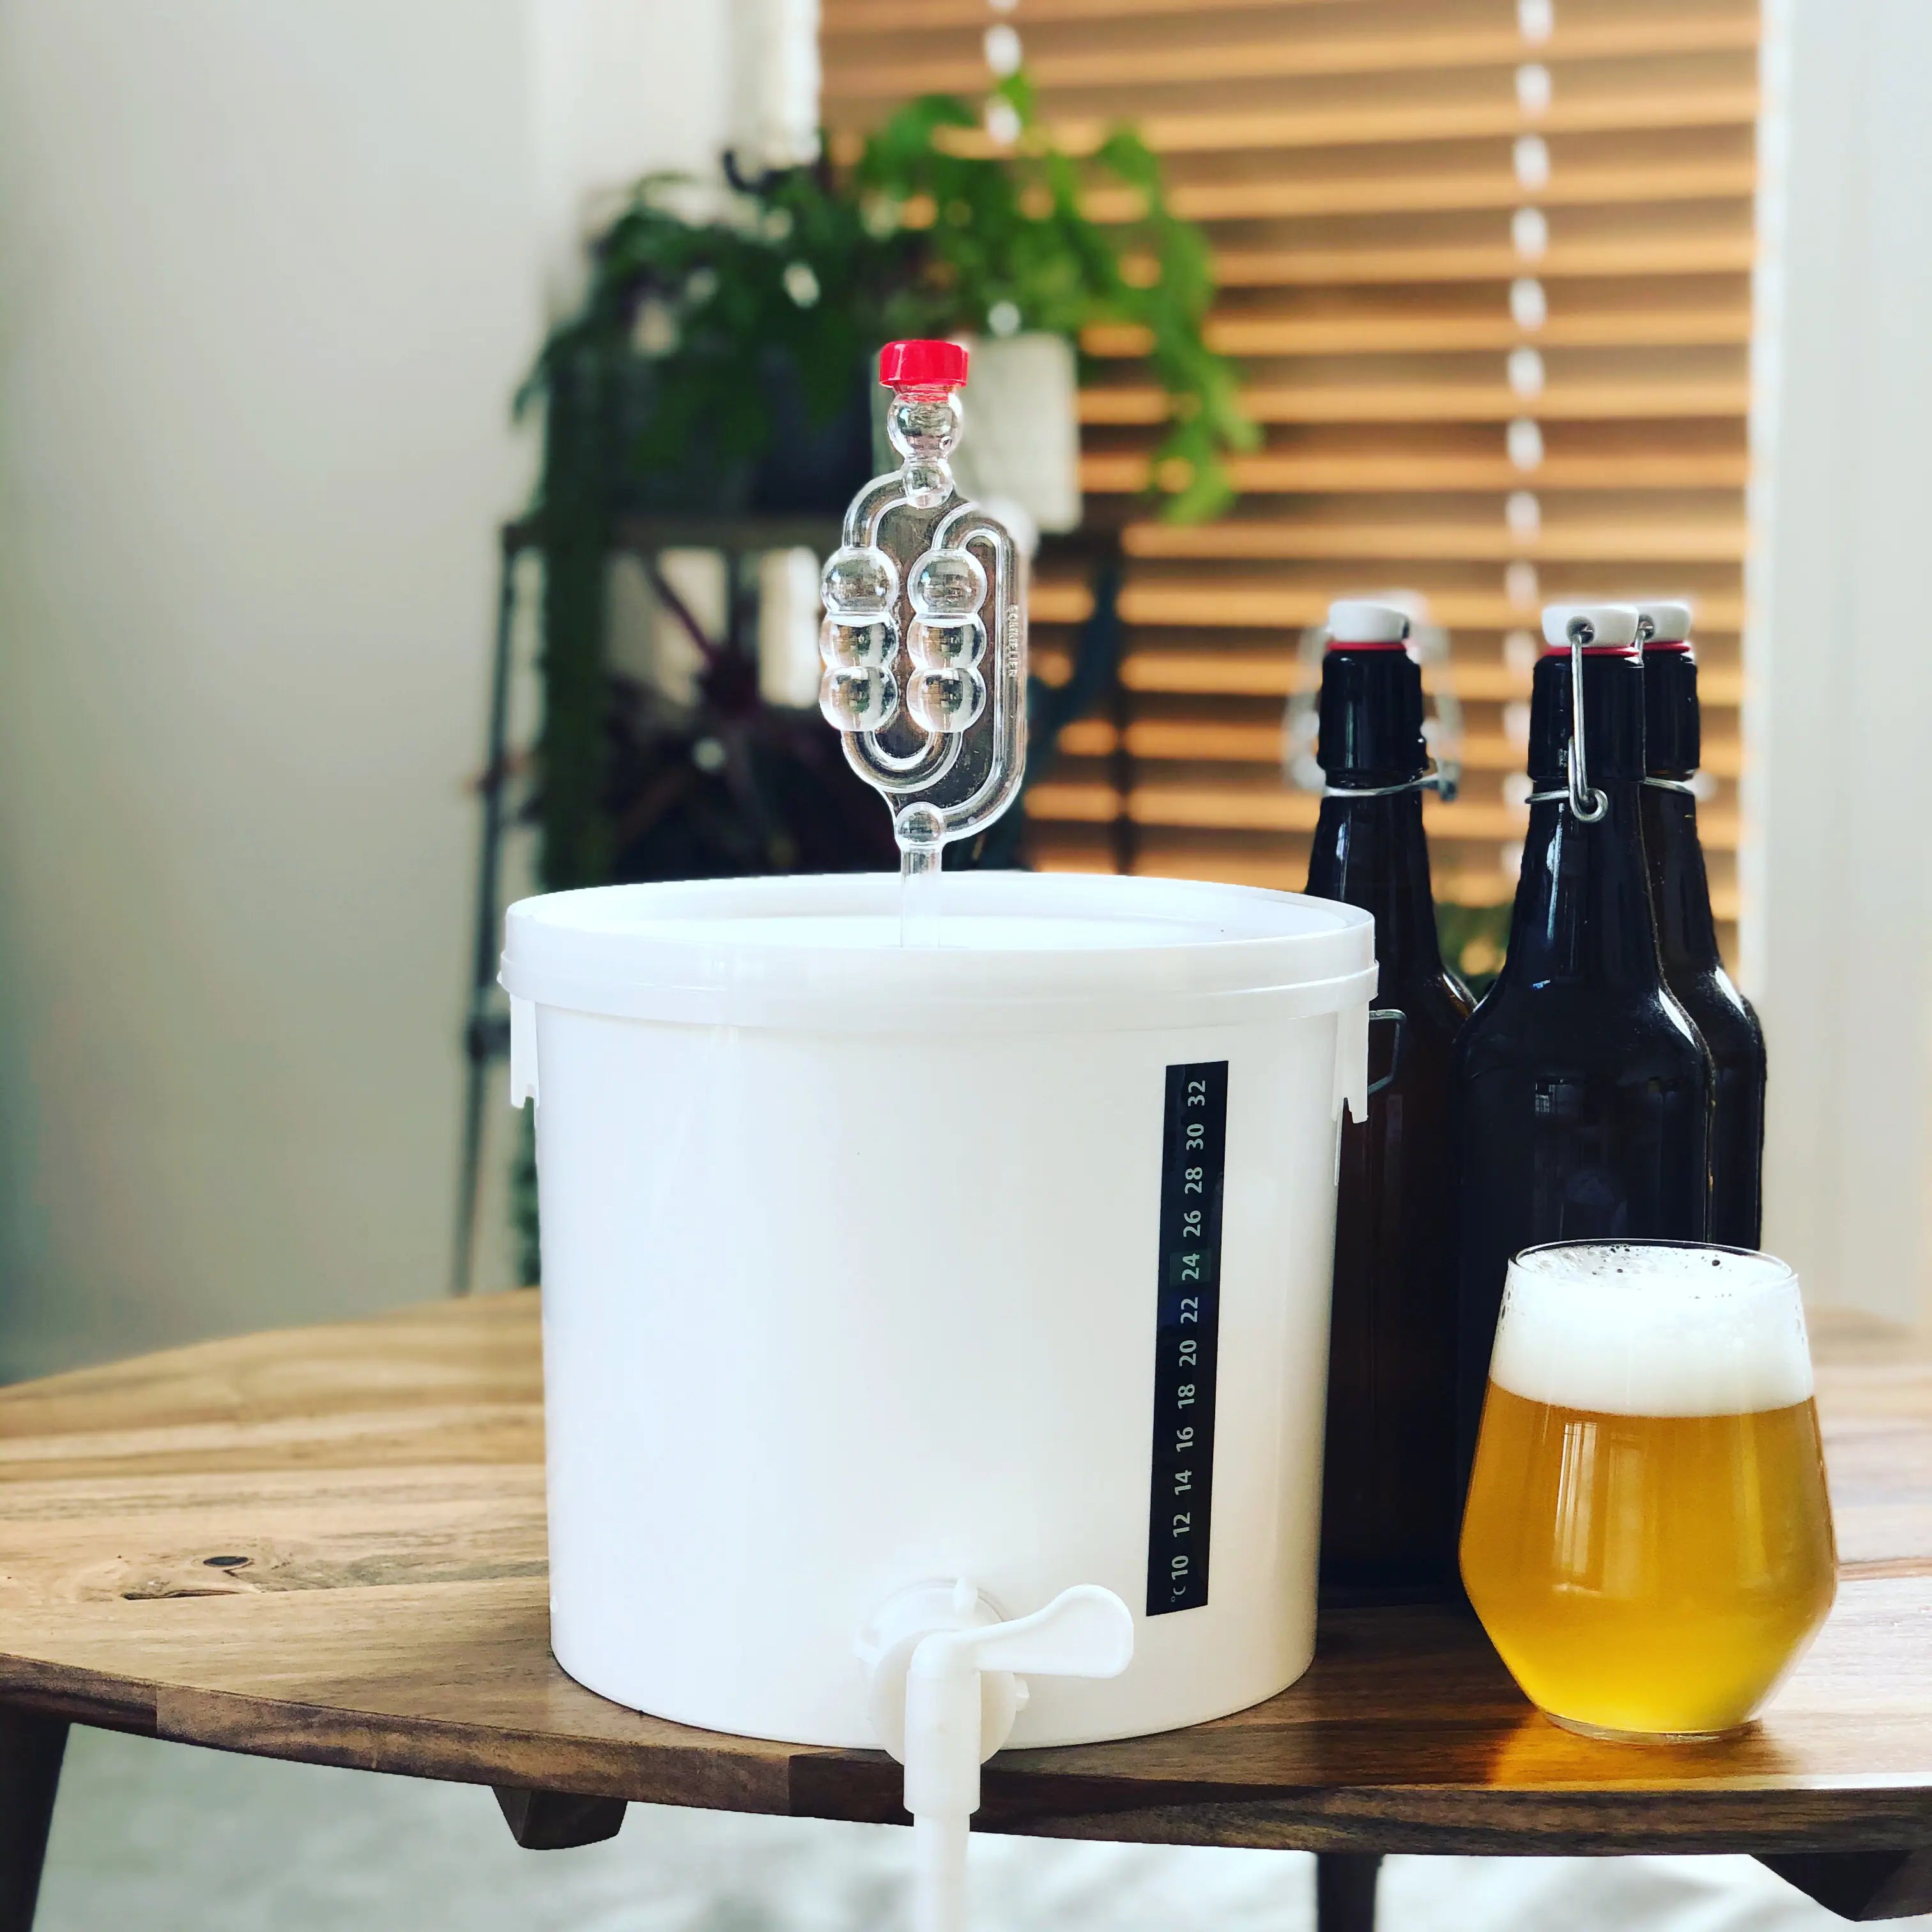 Can Home Brewing Really Be Simple? Enter Small-Batch Beer Brewing